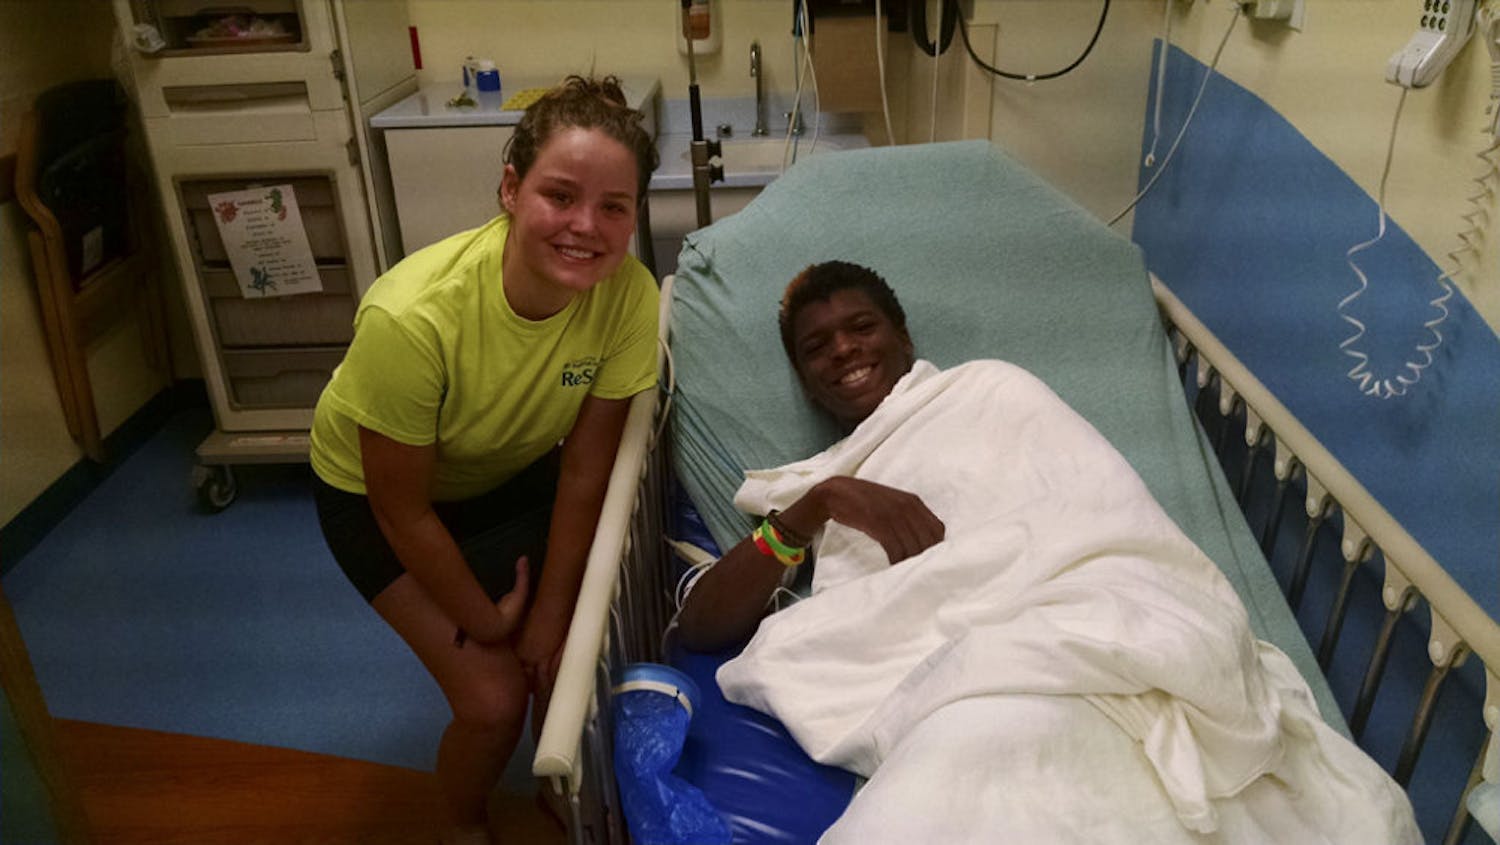 Emma Campbell, left, poses for a photo with 16-year-old Zyvion Speed-Mitchell at UF Health Shands Hospital